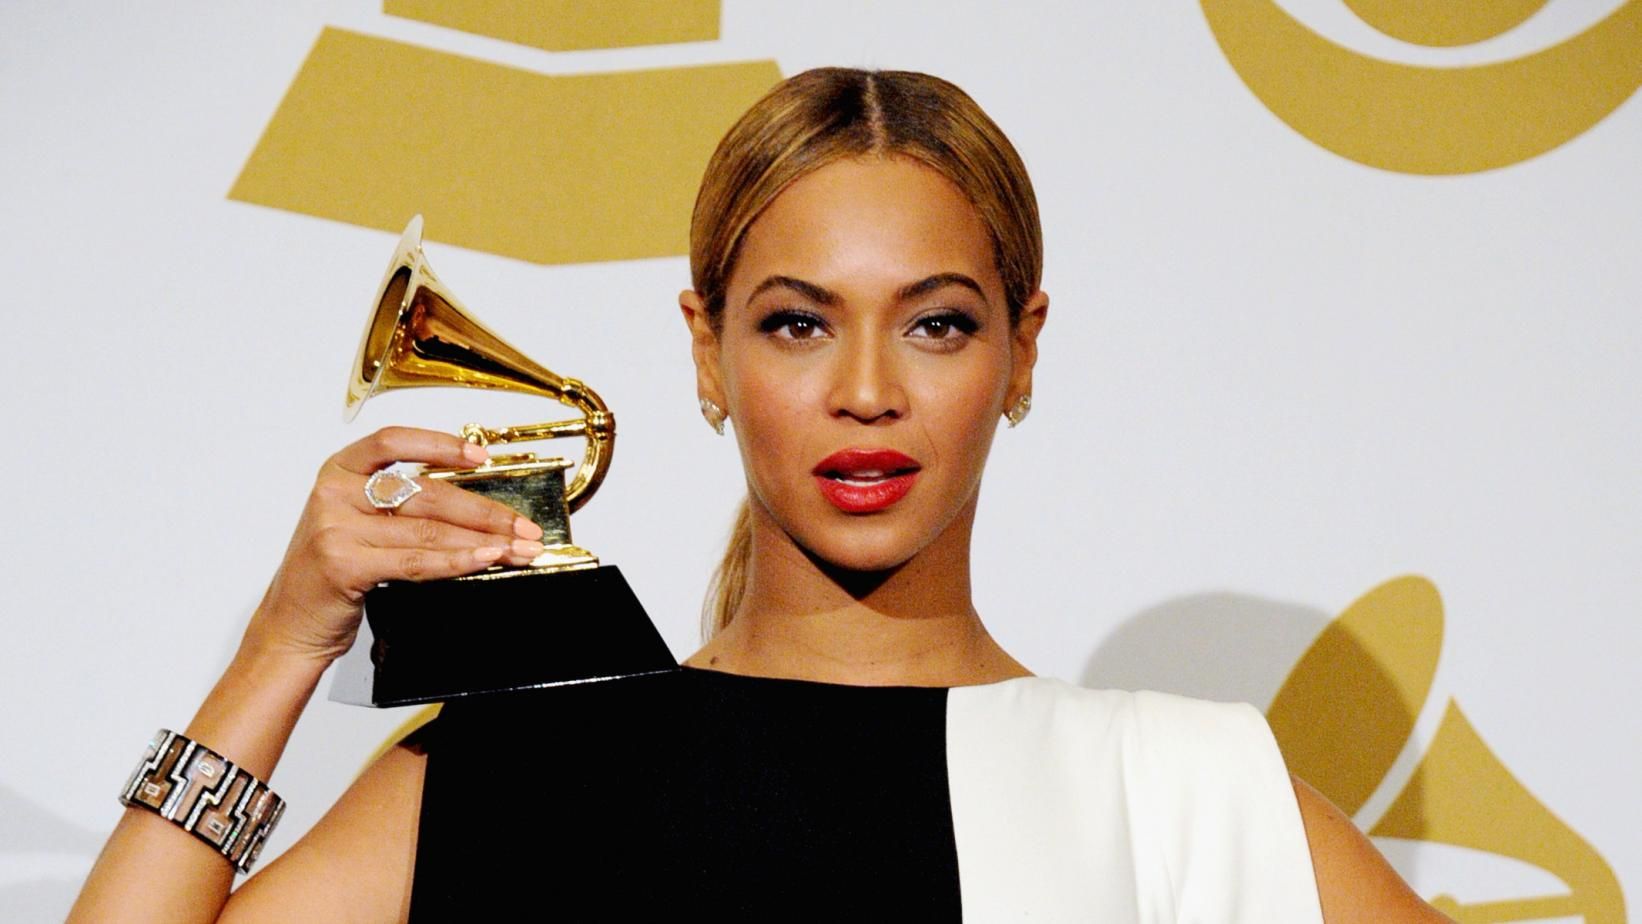 Beyonce at the Grammy